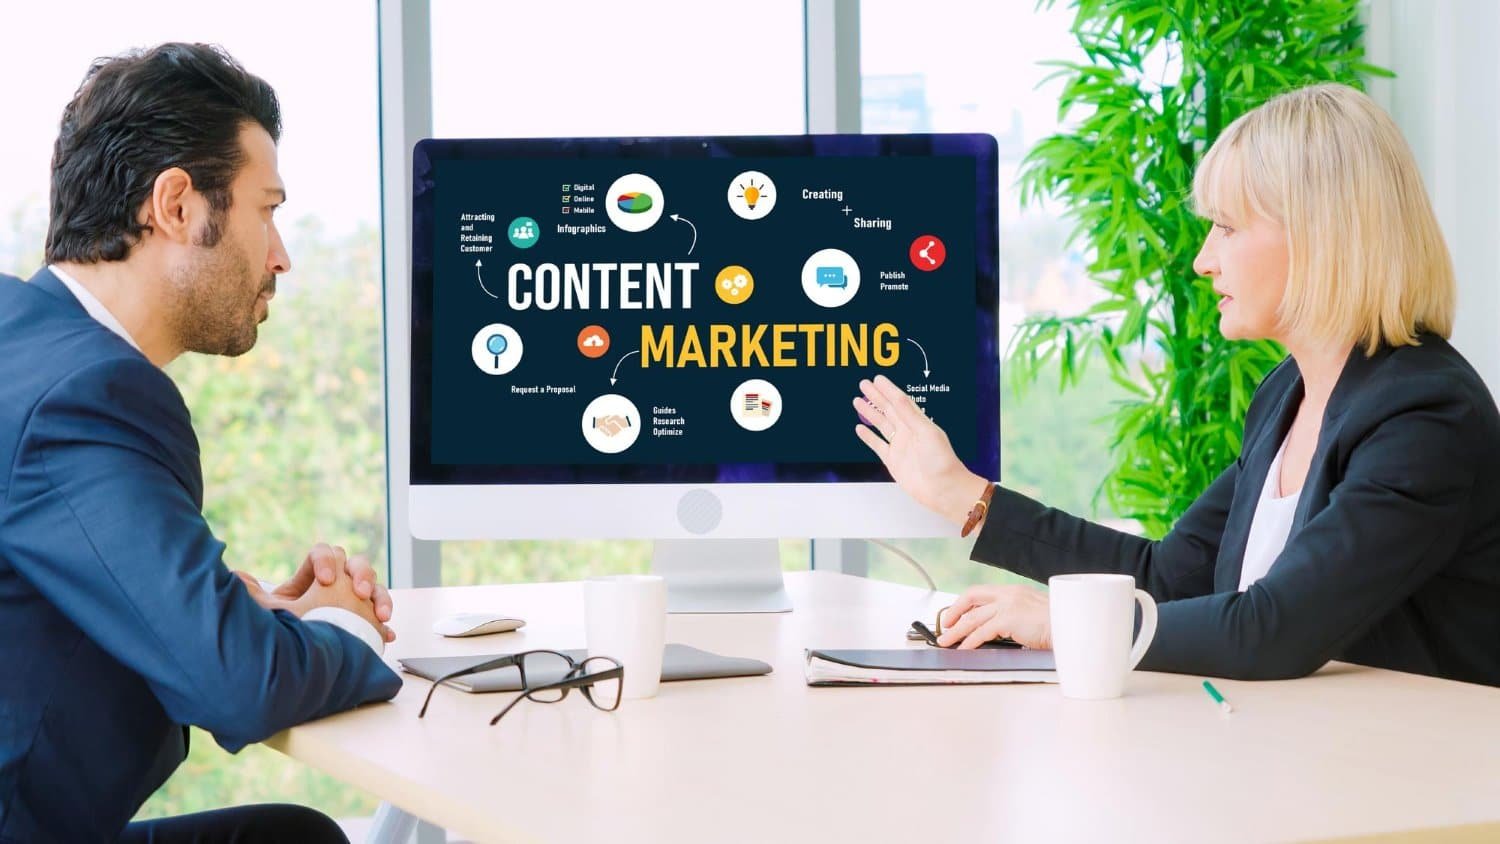 Engaging Content Formats for Digital Marketers